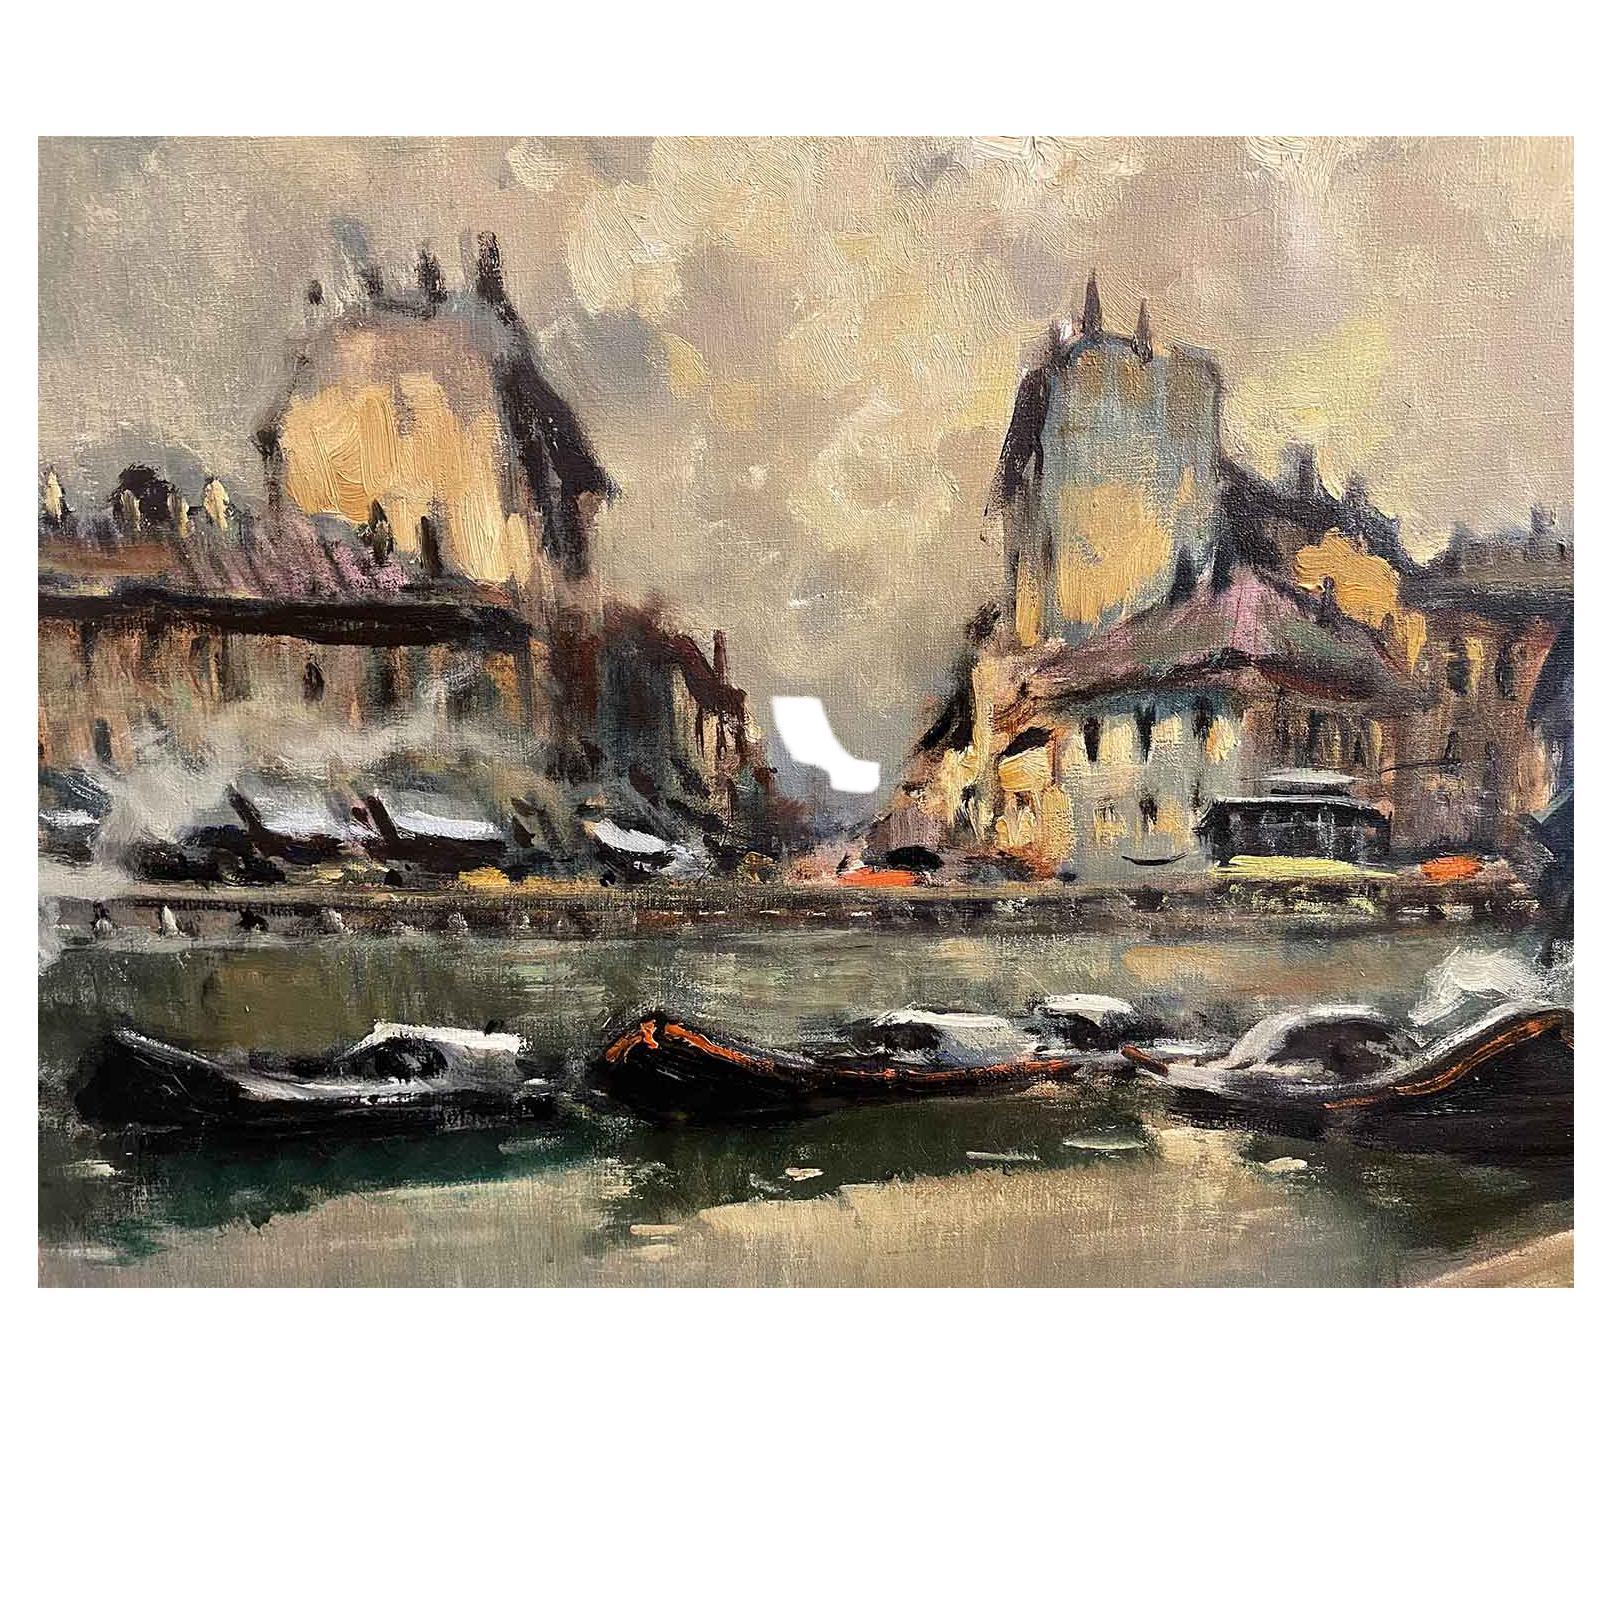 From Italy an original colorful view of Milan depicting the Ticinese Darsena Navigli Canal with boats and buildings, an oil on canvas painting signed lower lright C.Castelfranchi Milano by the Italian painter Cirano Castelfranchi, Milan 1912-1973.